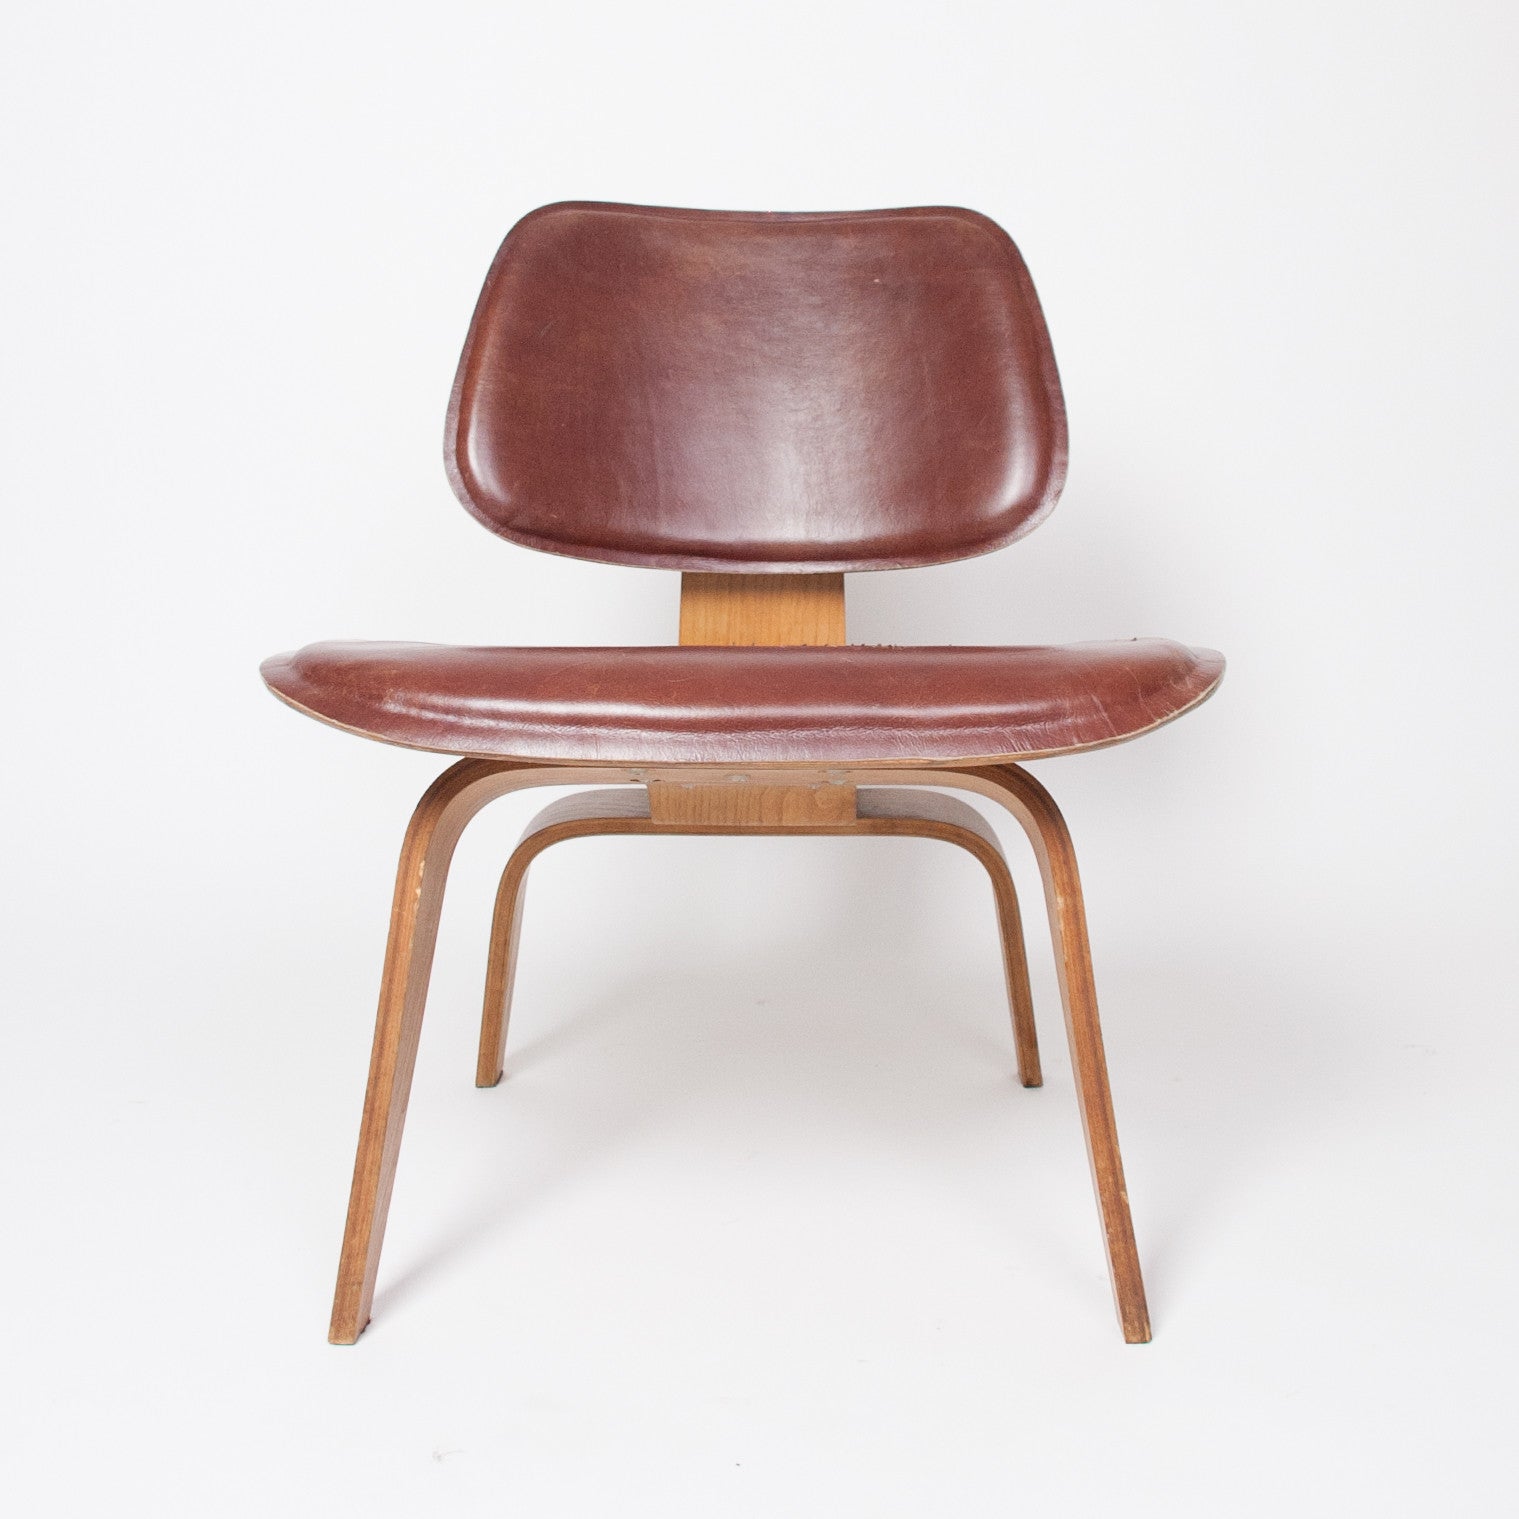 SOLD Eames Evans Herman Miller 1947 LCW Plywood Lounge Chair 